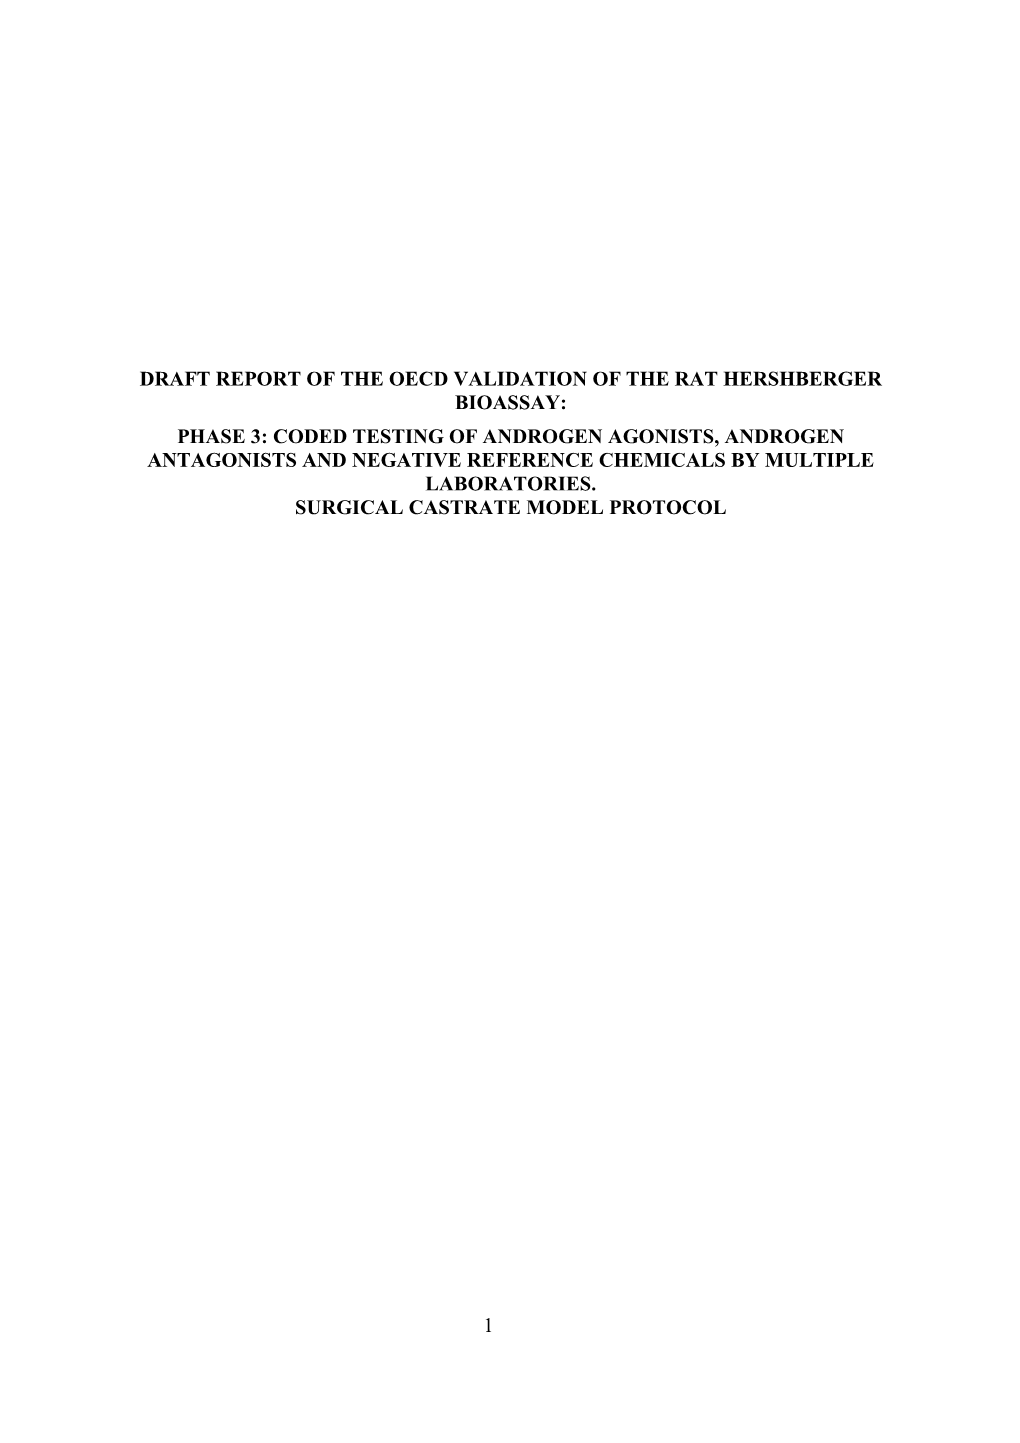 1 Draft Report of the Oecd Validation of the Rat